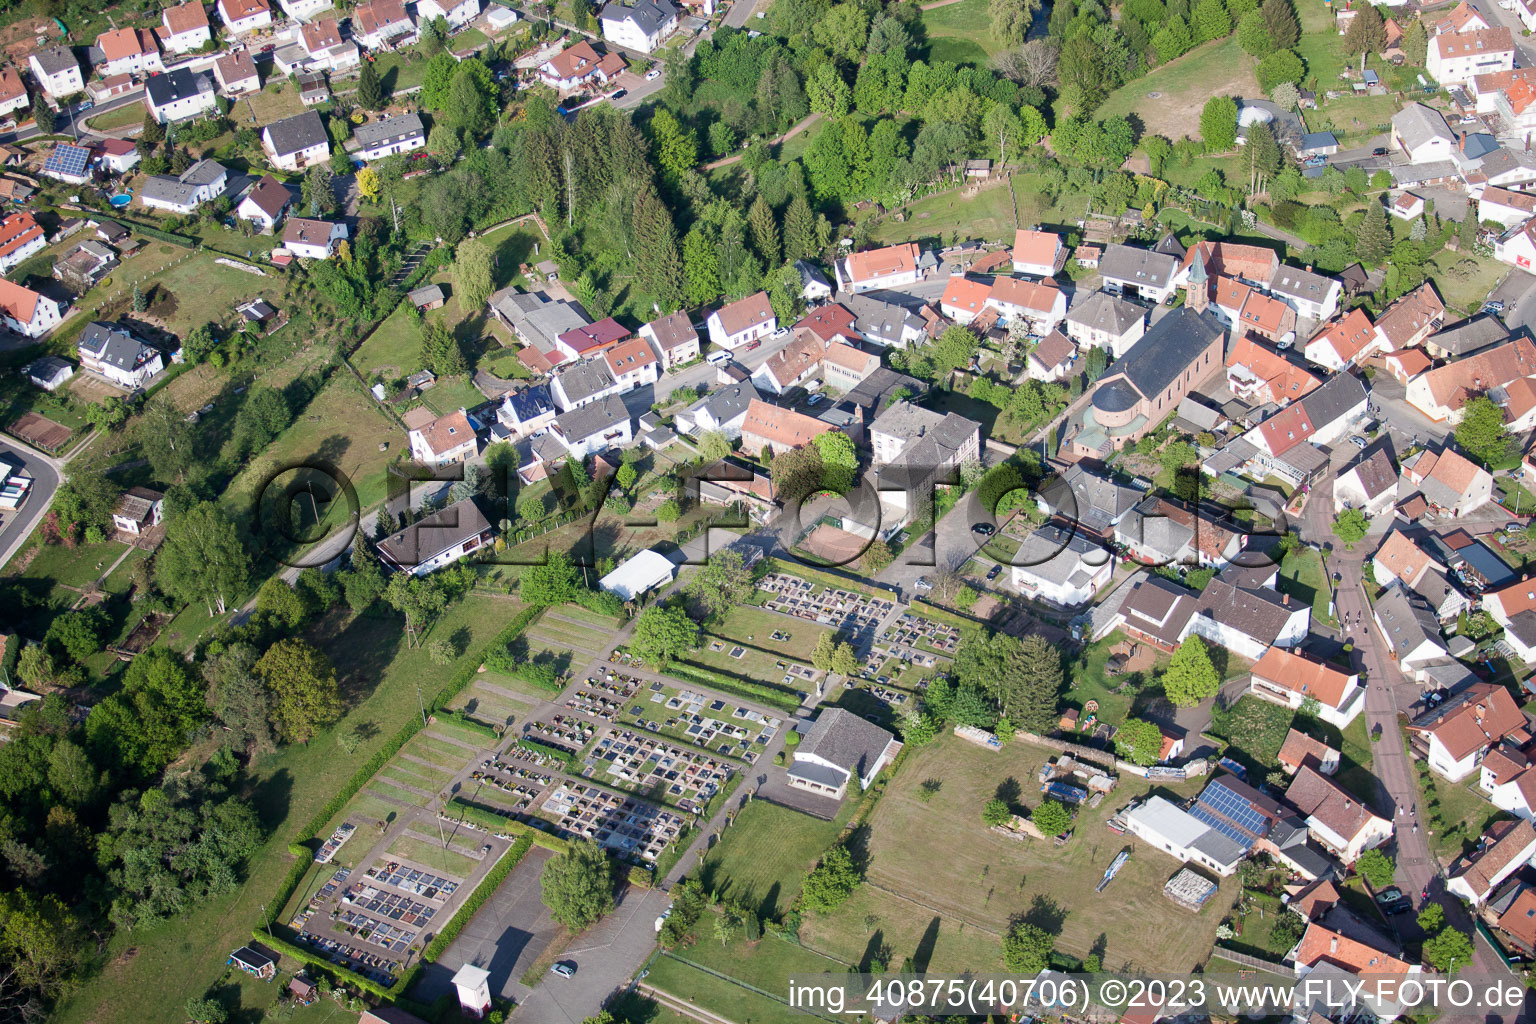 Aerial view of Eppenbrunn in the state Rhineland-Palatinate, Germany